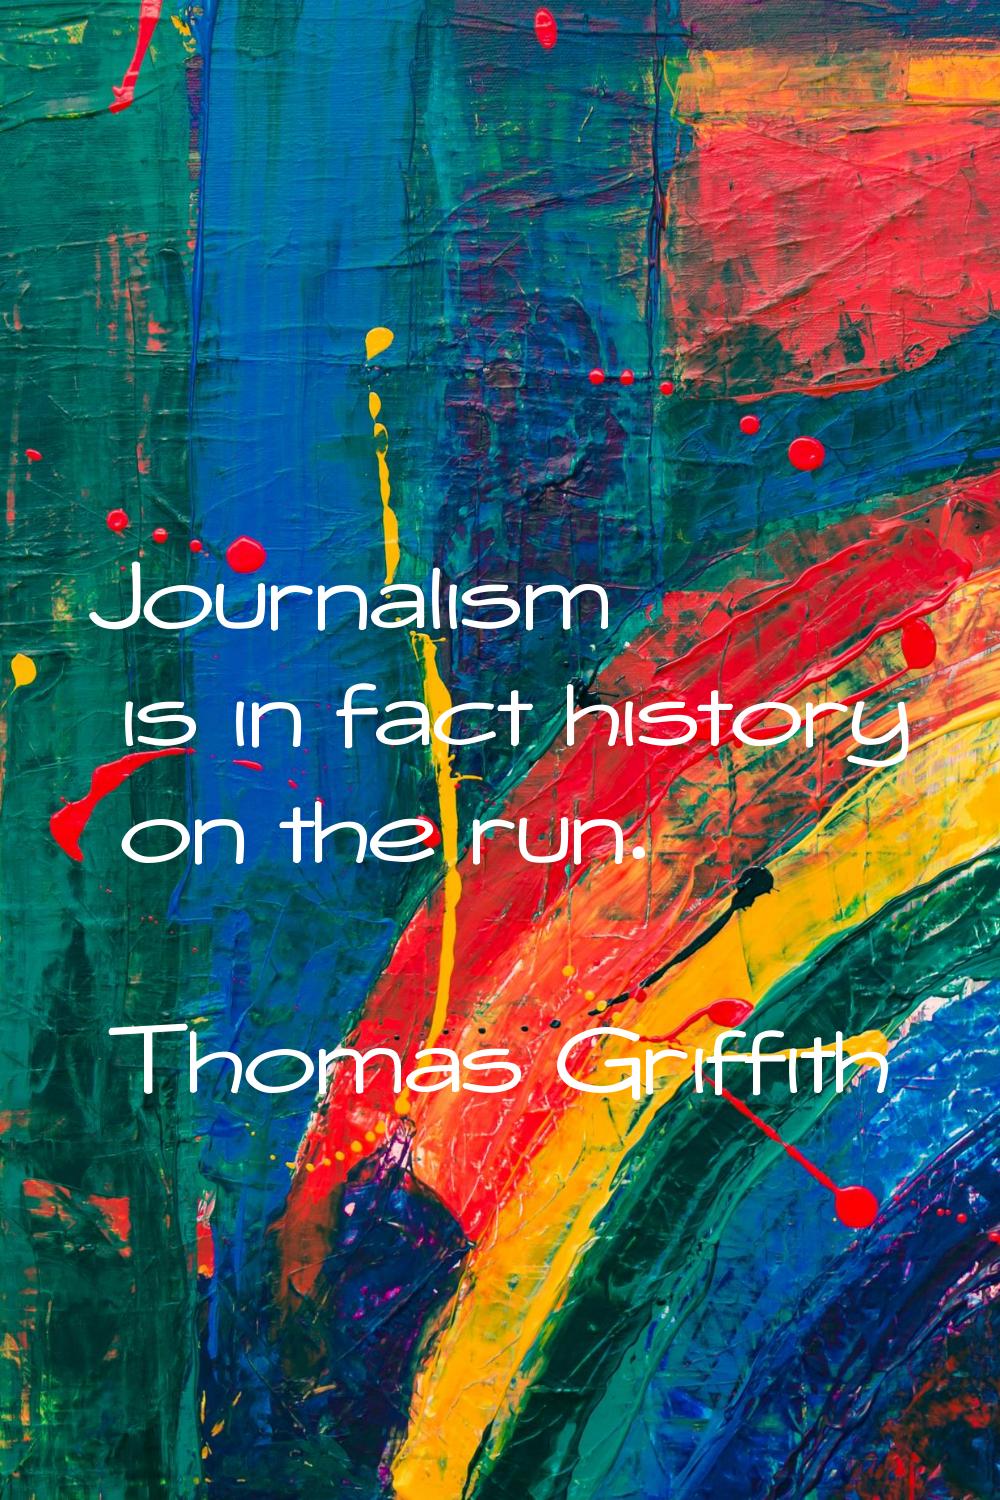 Journalism is in fact history on the run.